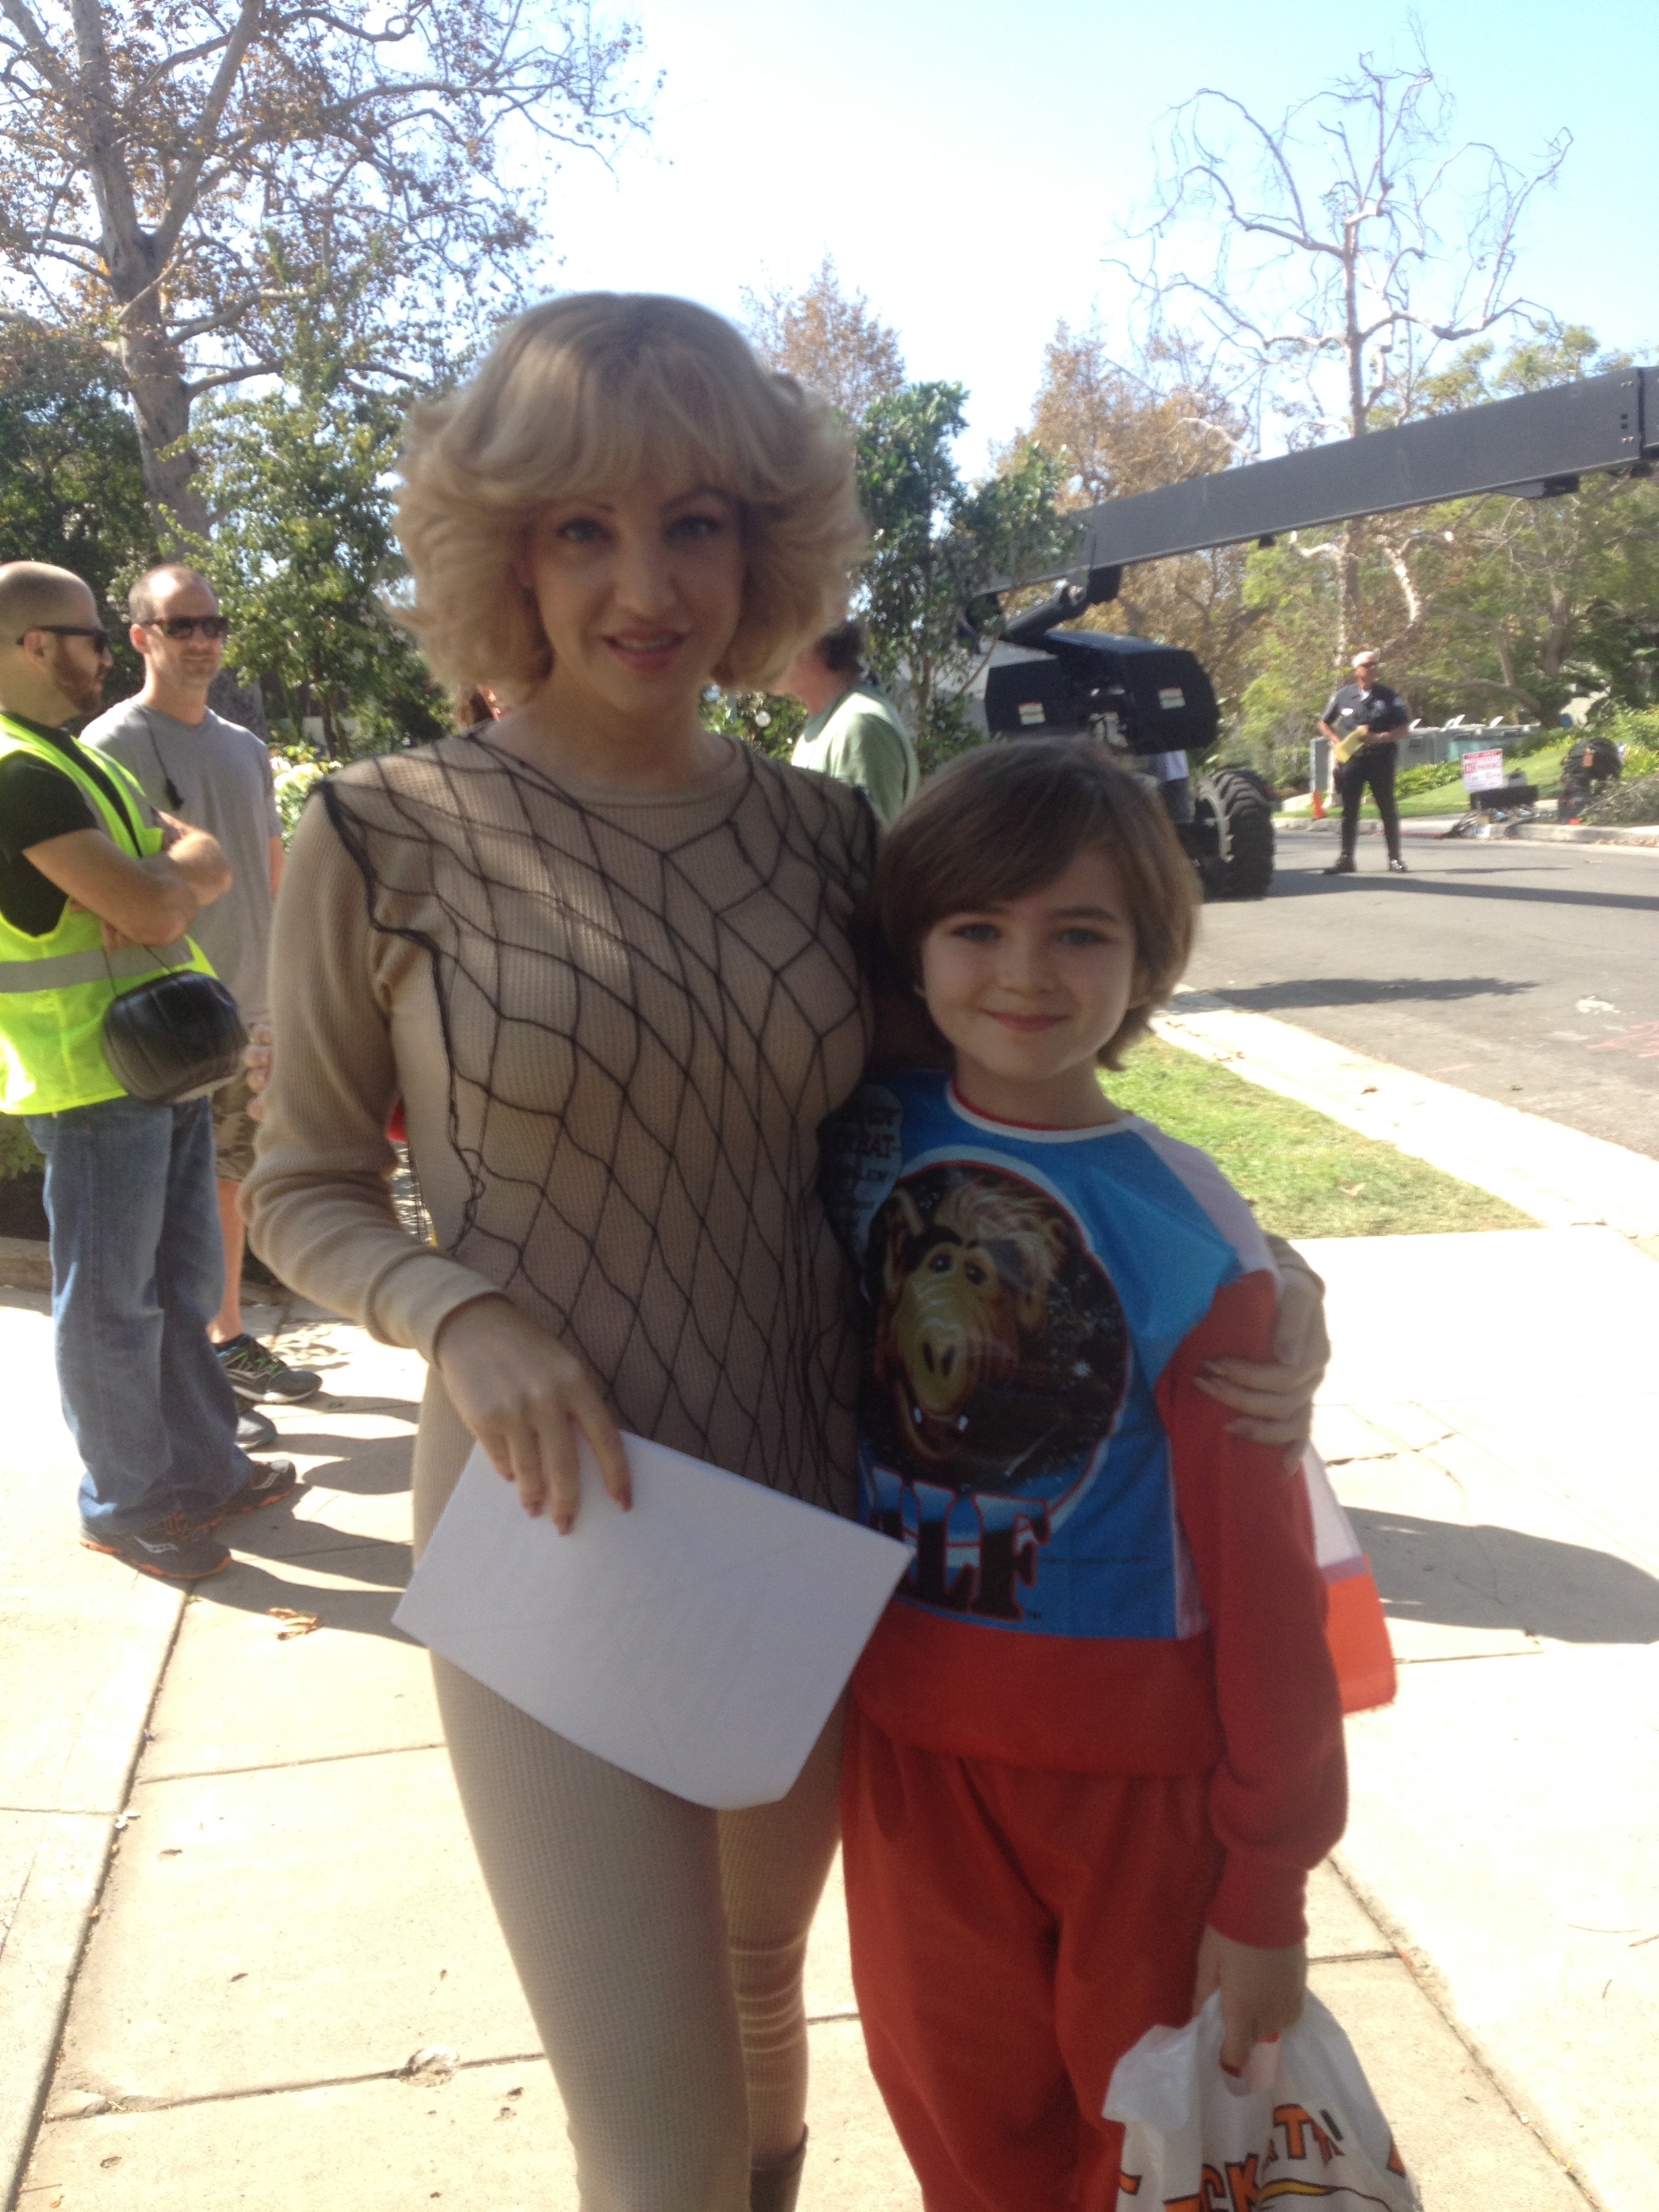 The Goldbergs with Wendi McLendon-Covey